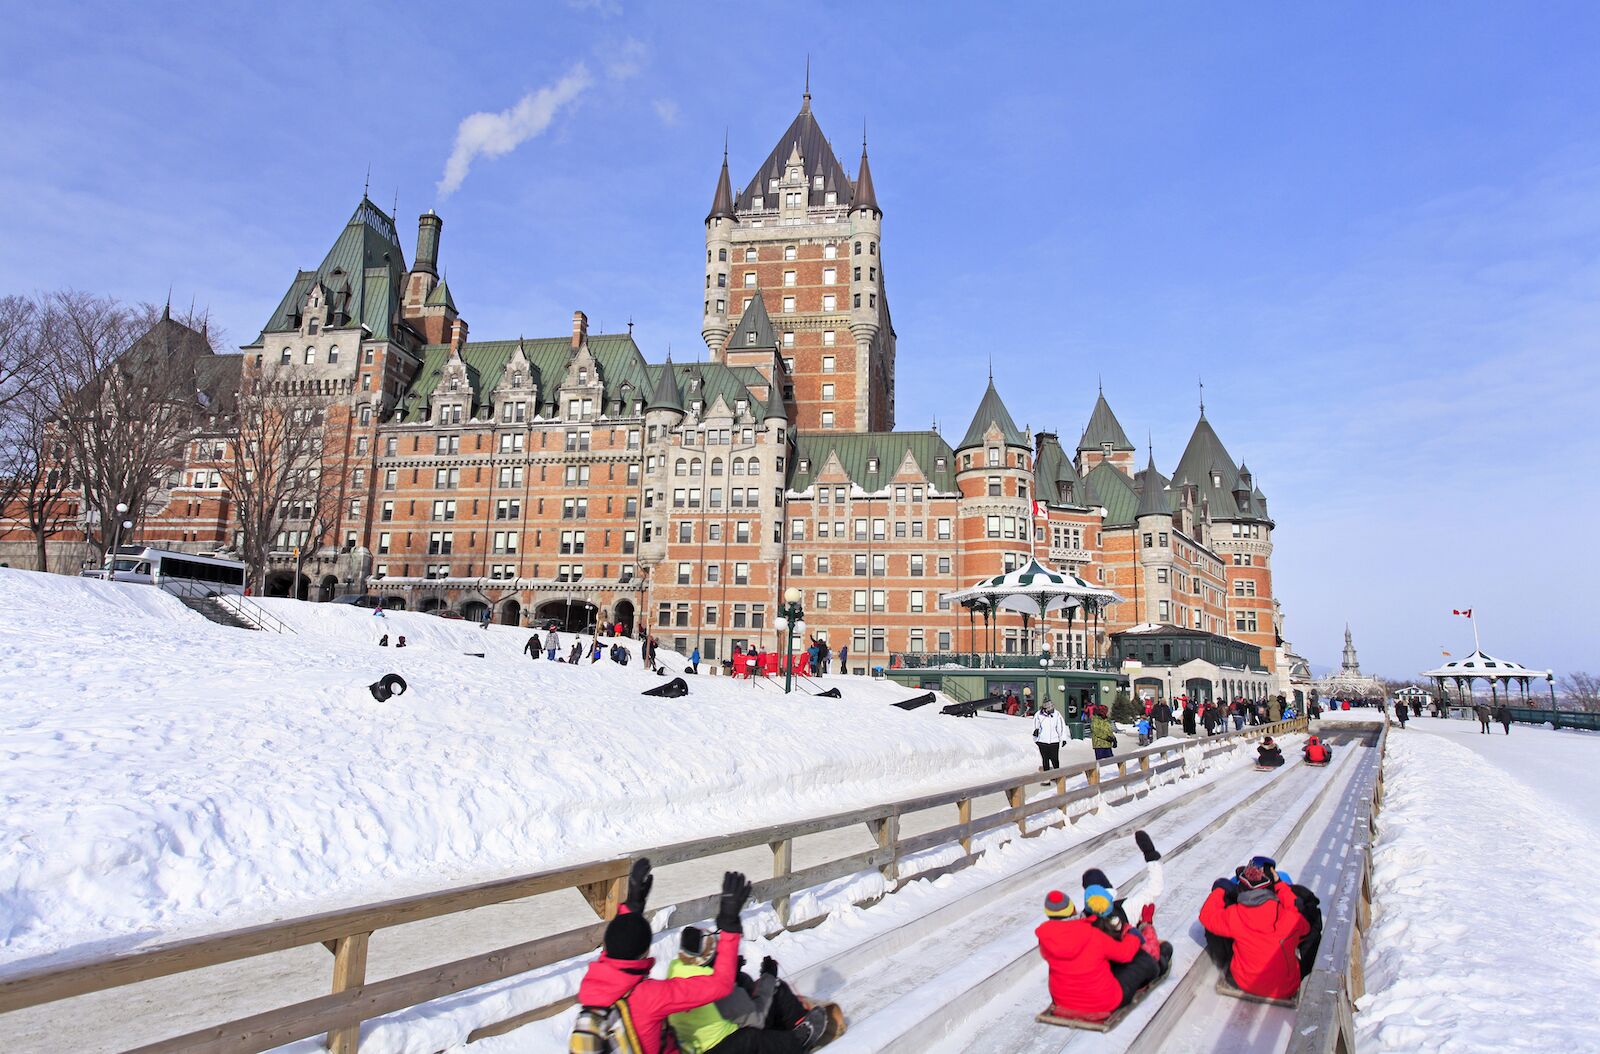 Chateau Frontenac, Quebec City in winter with its traditional slide descent